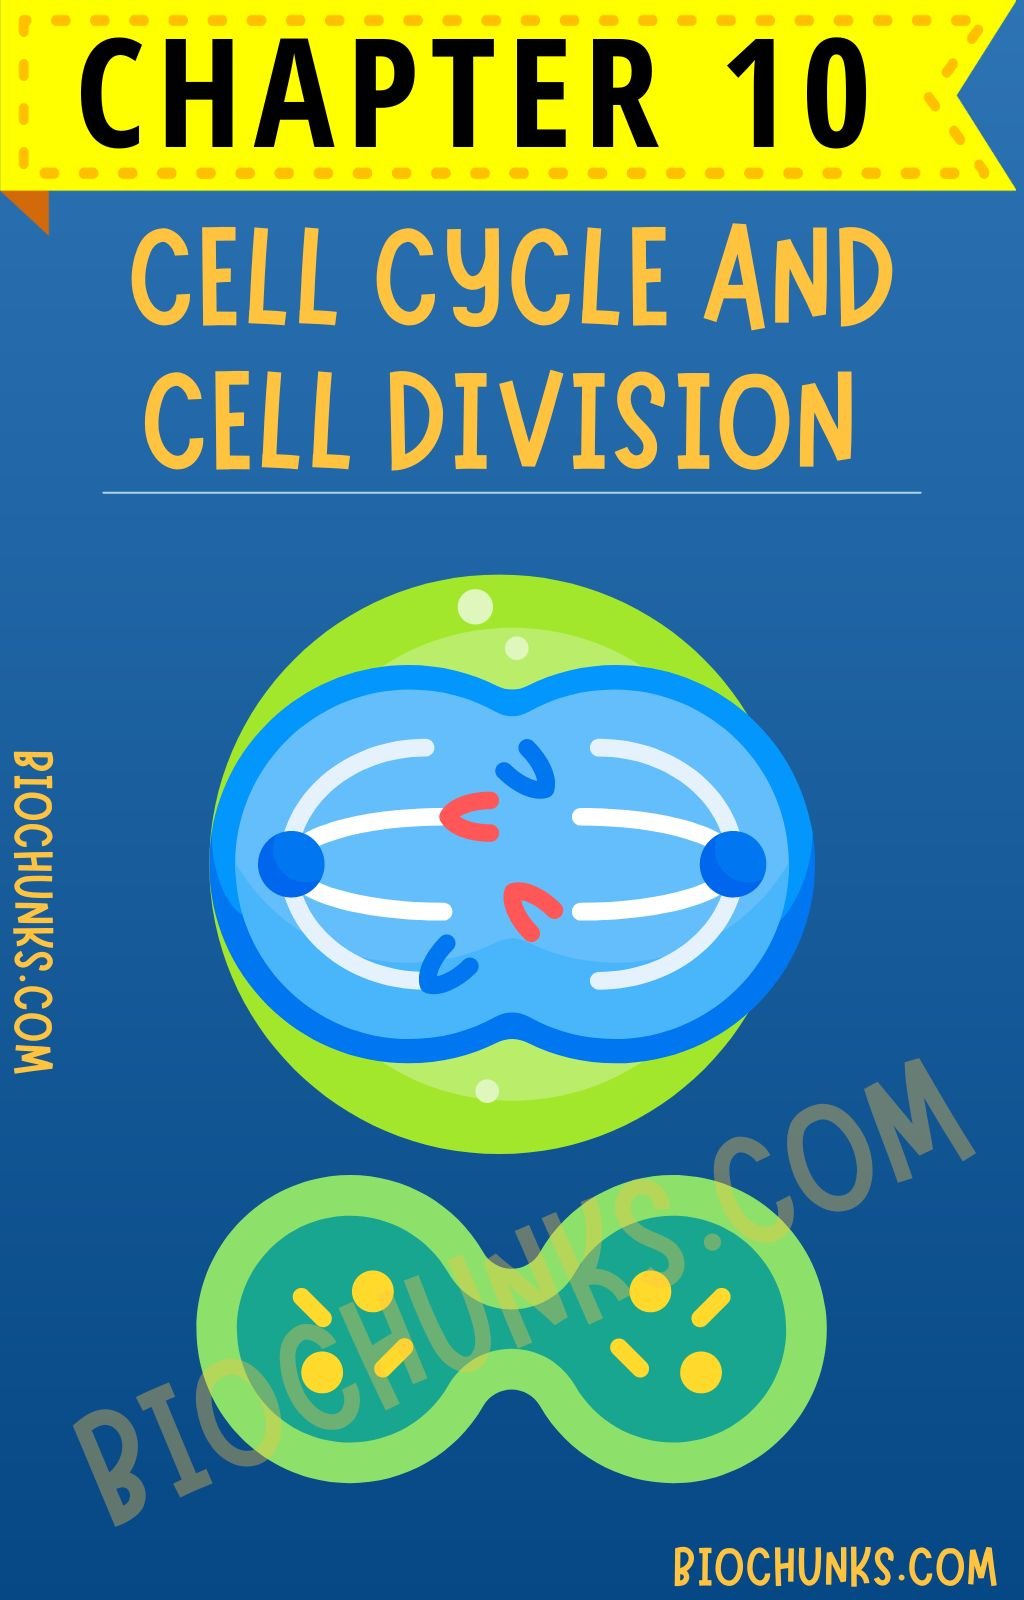 Cell Cycle and Cell Division Chapter 10 Class 11th biochunks.com